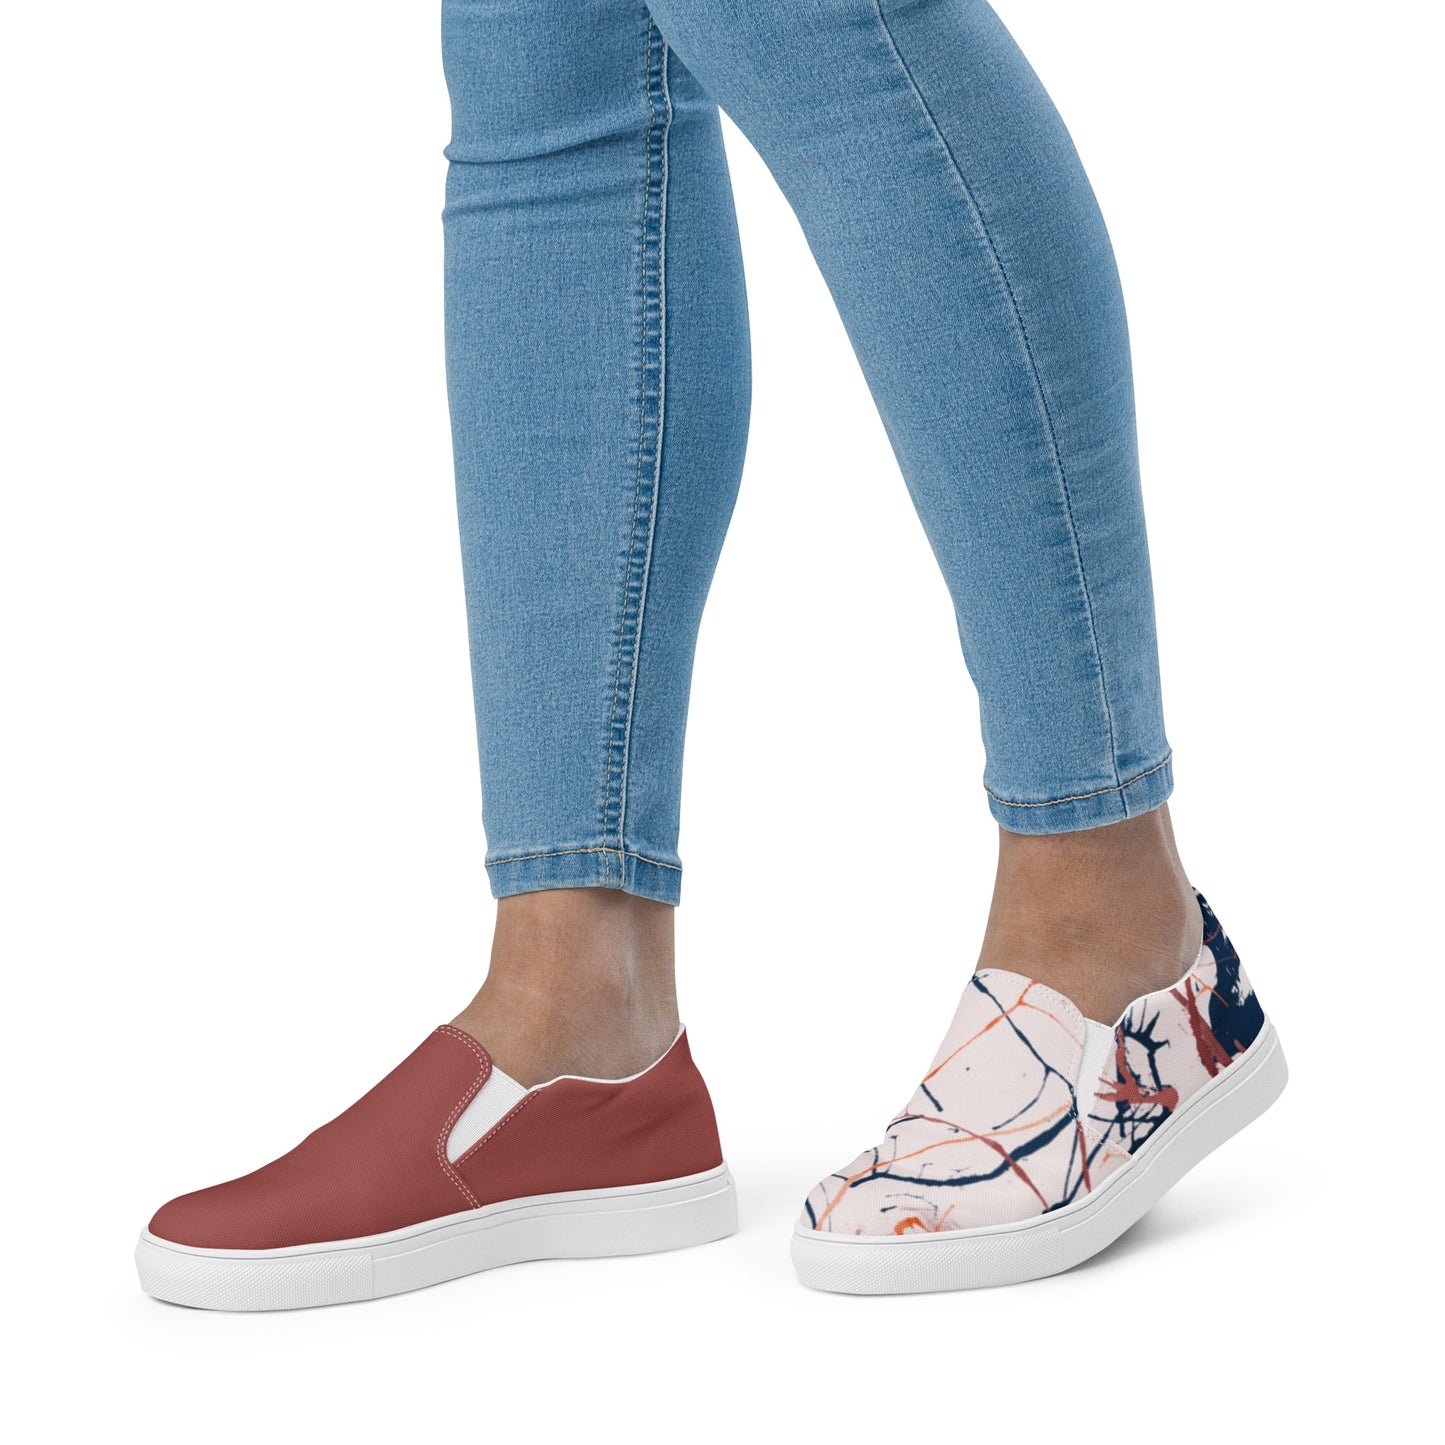 Women’s Pillars slip-on canvas shoes (red)